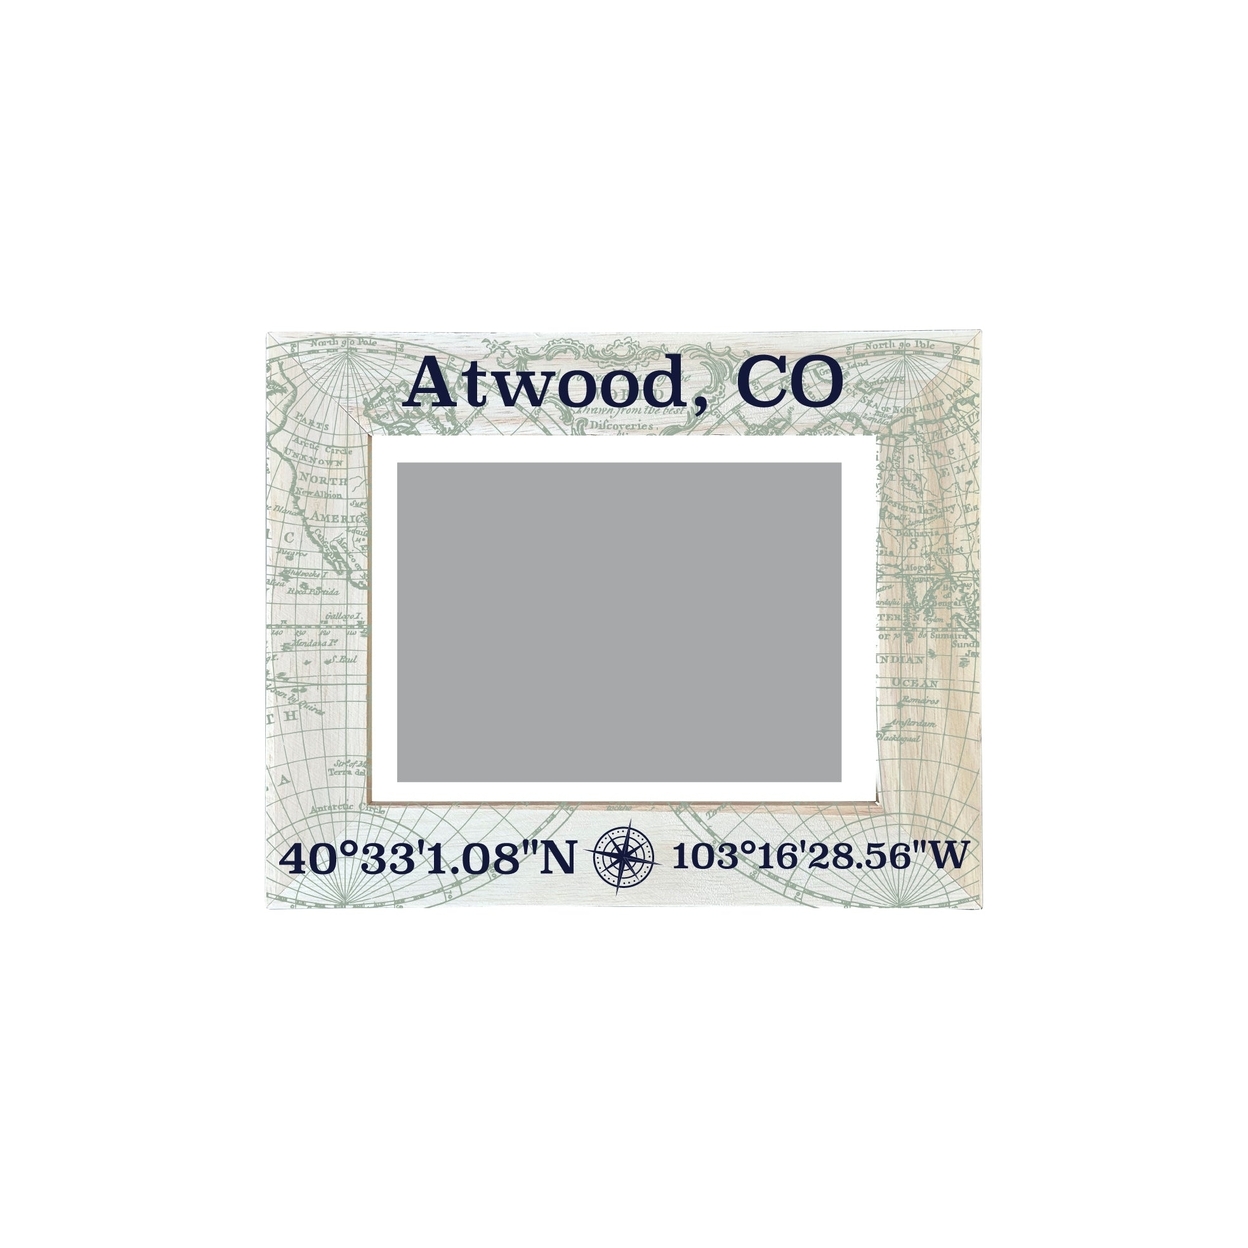 Atwood Colorado Souvenir Wooden Photo Frame Compass Coordinates Design Matted To 4 X 6